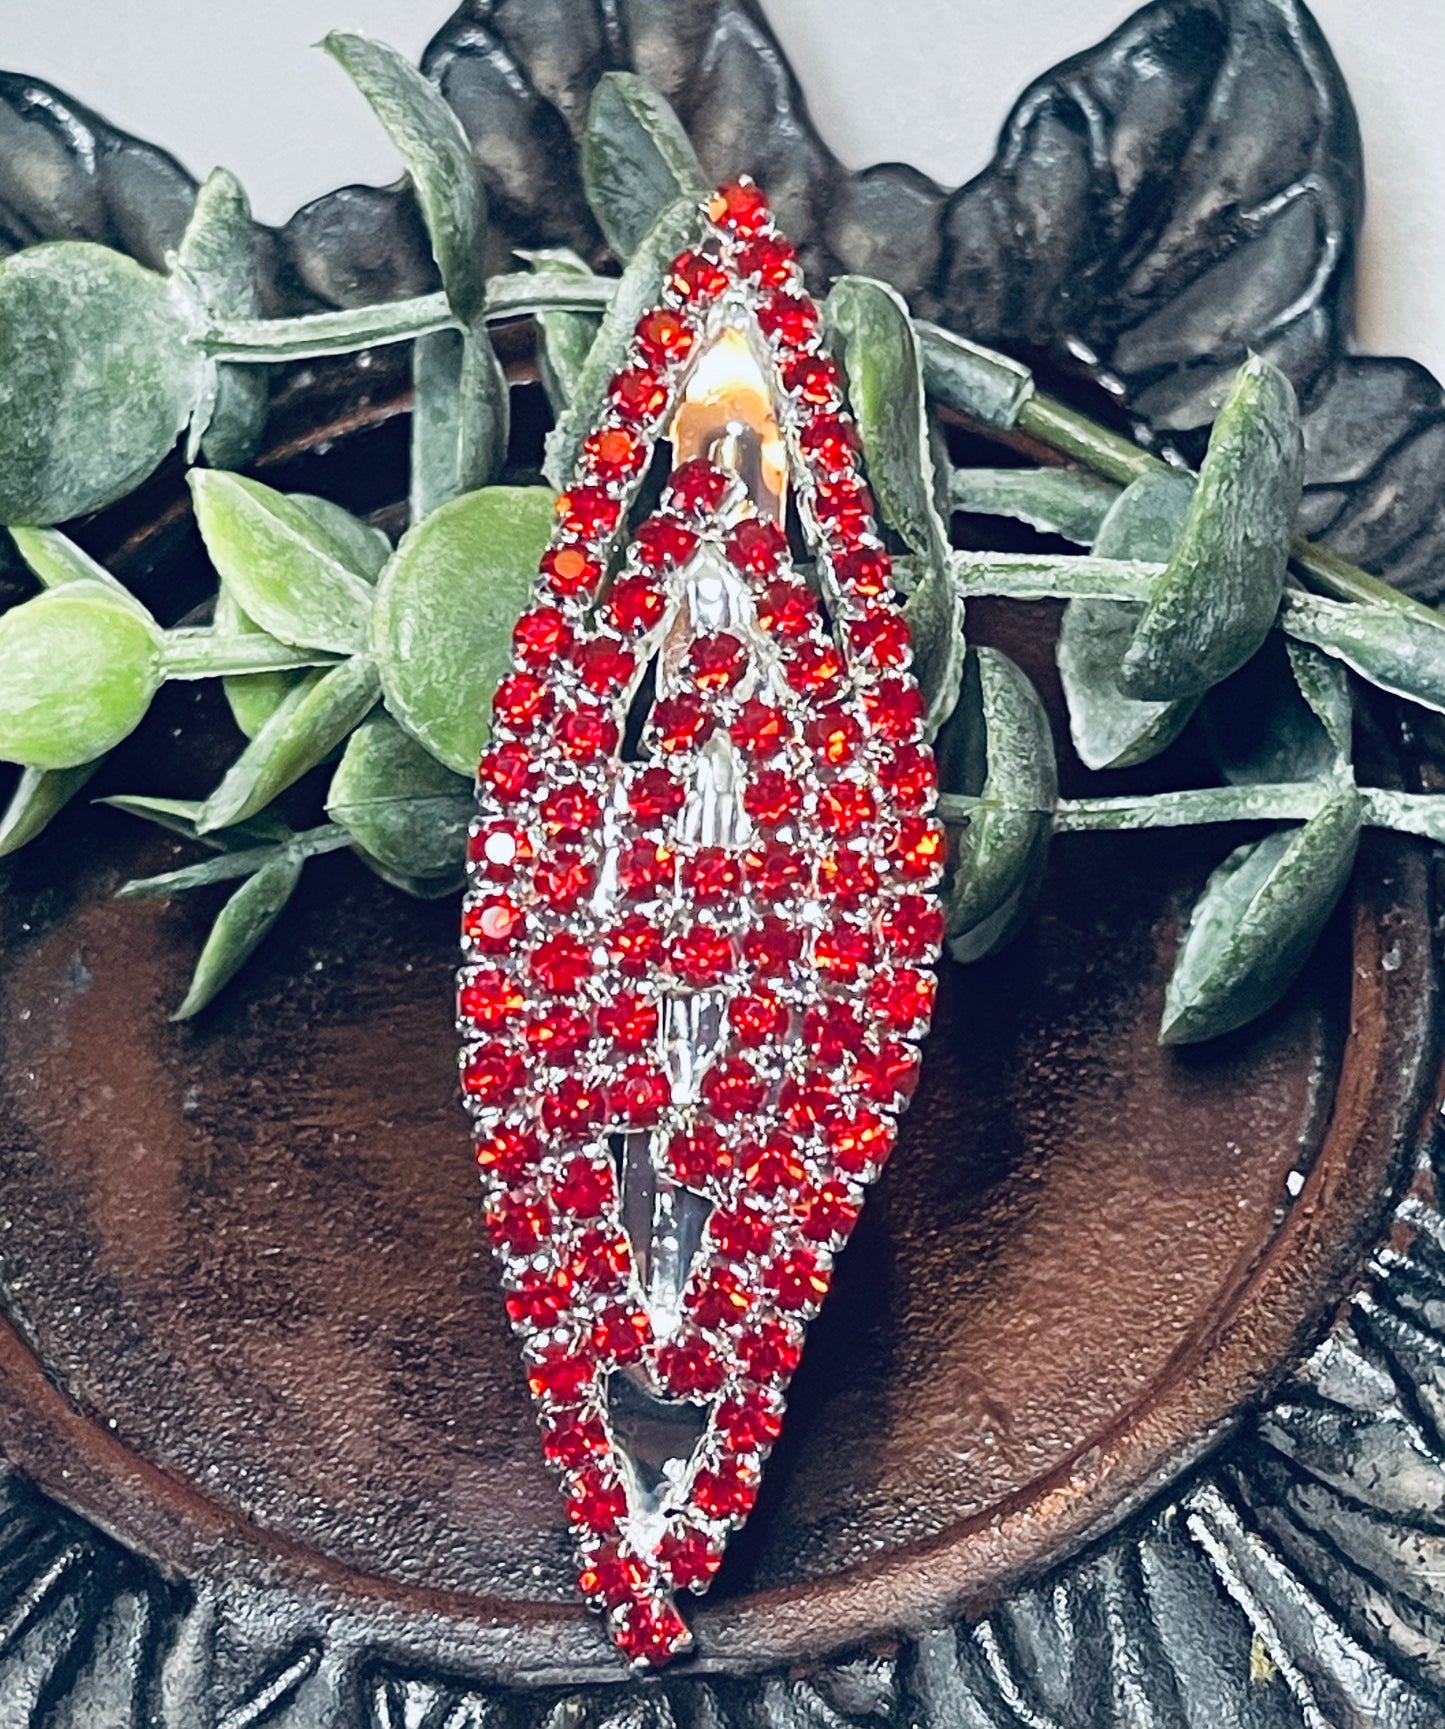 Red Crystal rhinestone barrette approximately 3.0” silver tone formal hair accessories gift wedding bridesmaid Prom birthday gifts